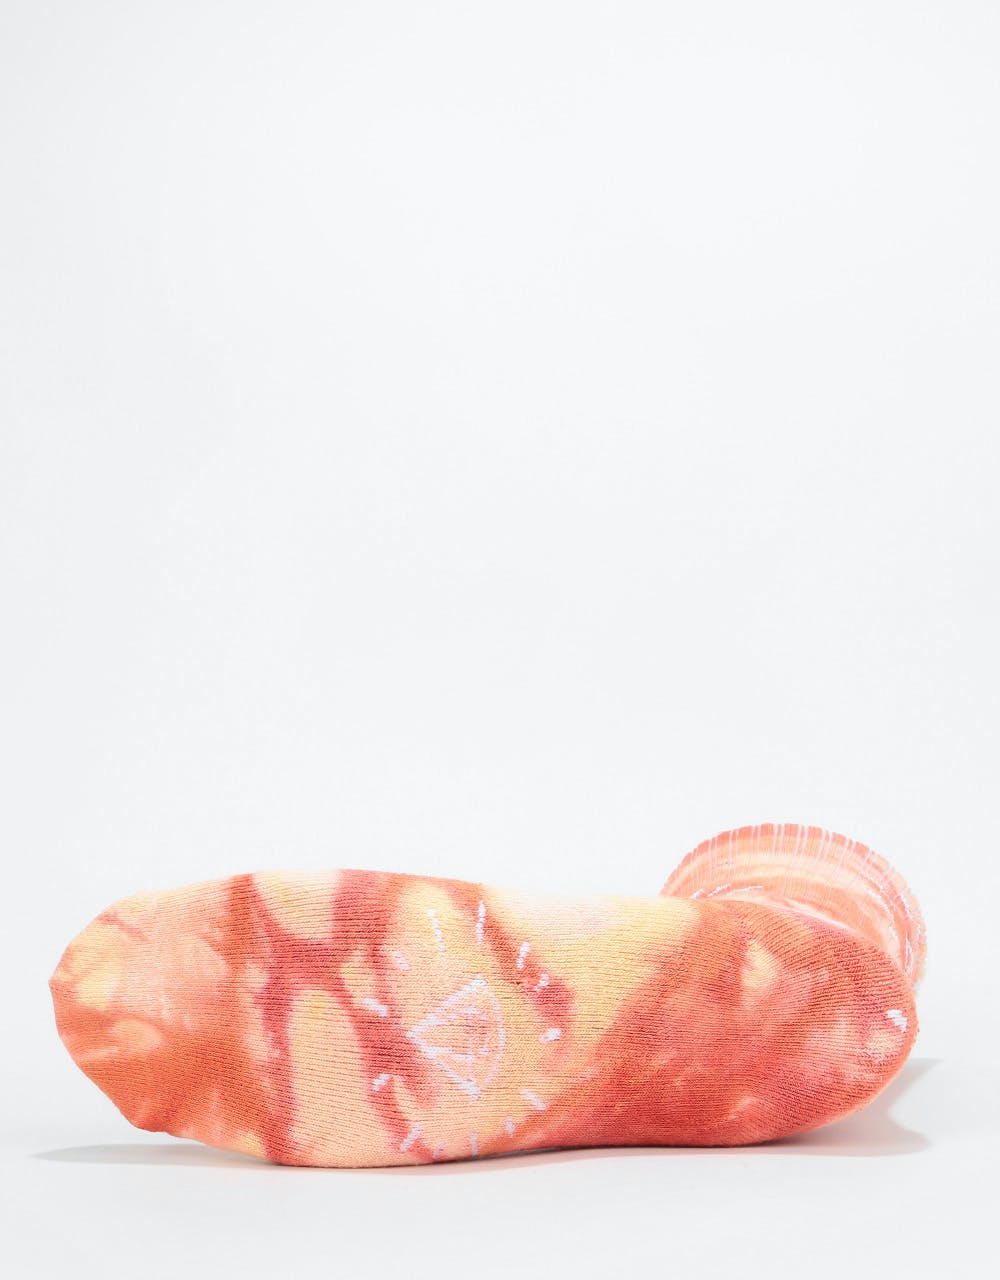 Diamond Supply Co. Outshine Washed Crew Socks - Coral